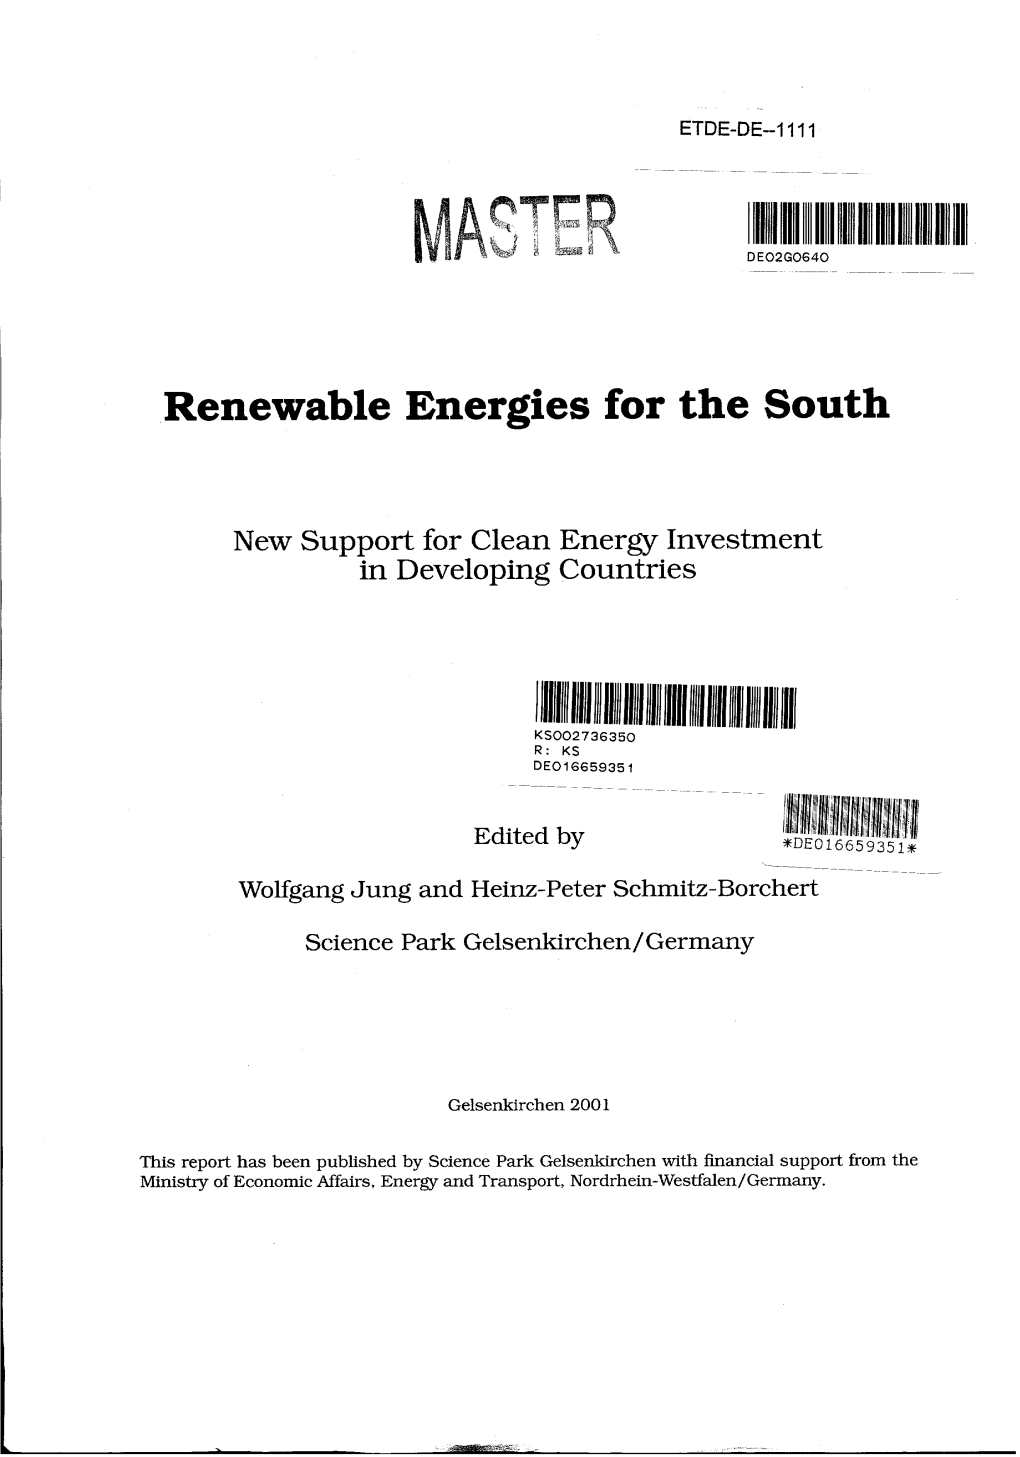 Renewable Energies for the South. New Support for Clean Energy